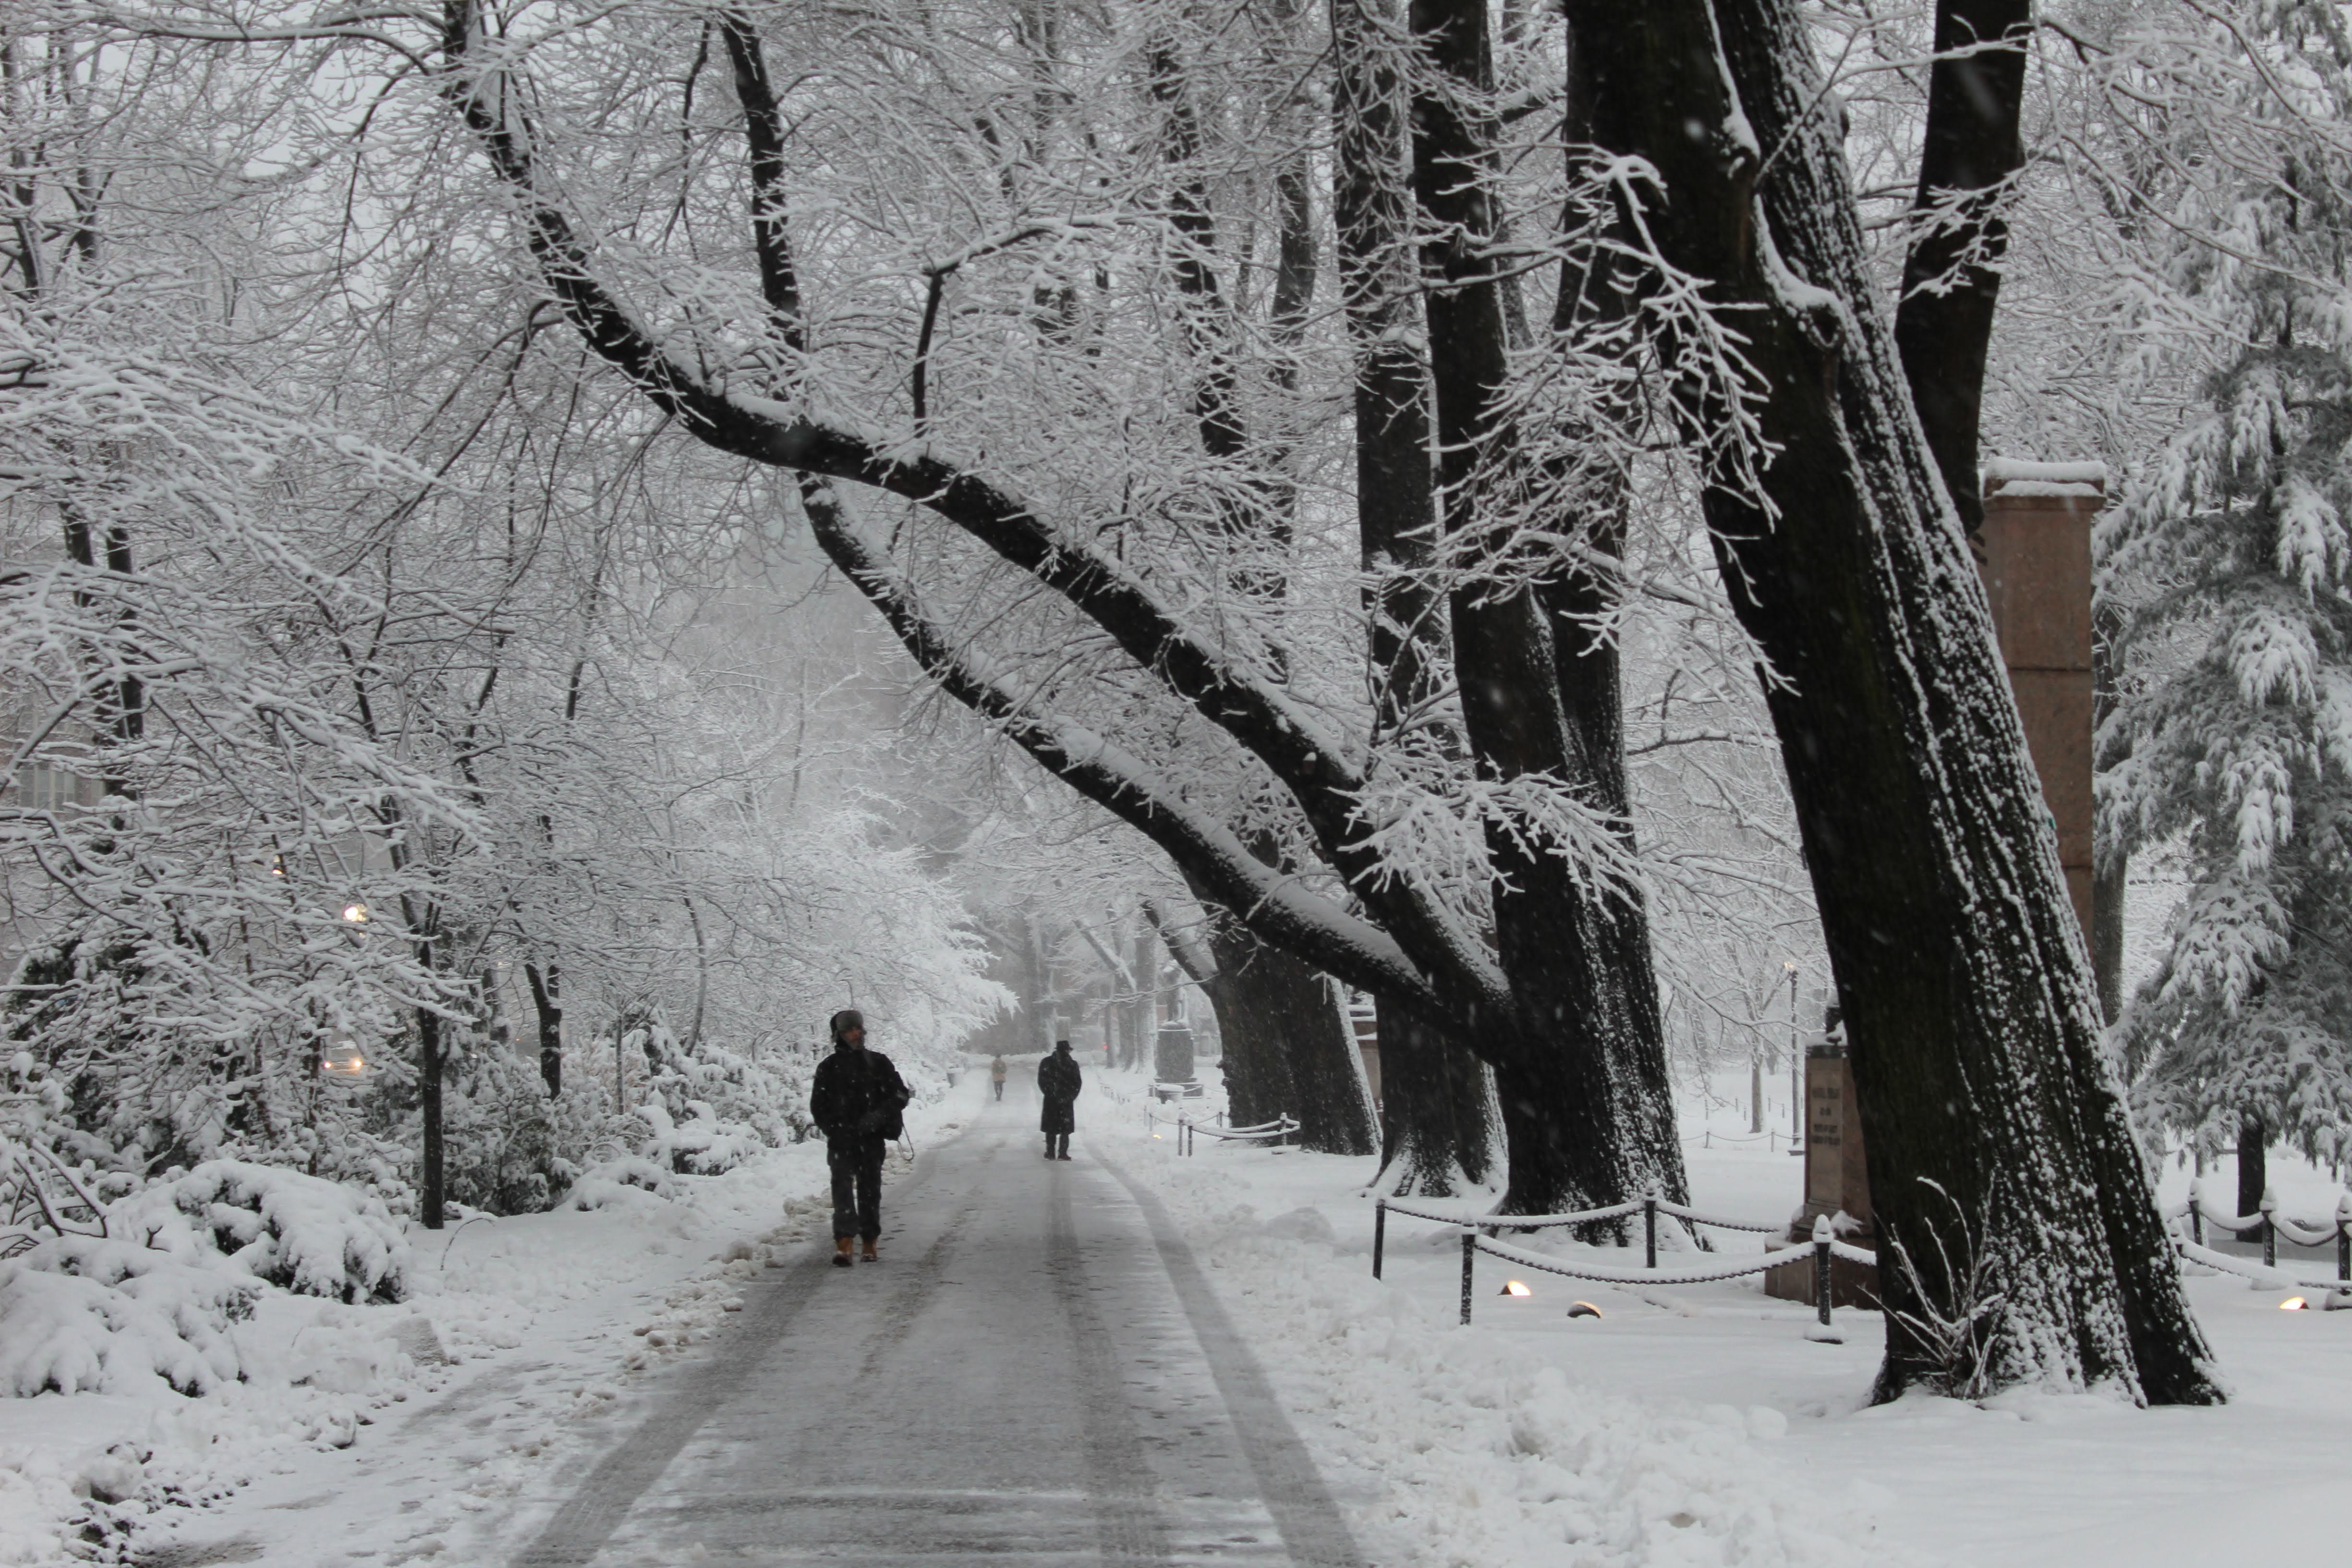 Backs of two people walking down a snowy path under the cover of snow-covered trees